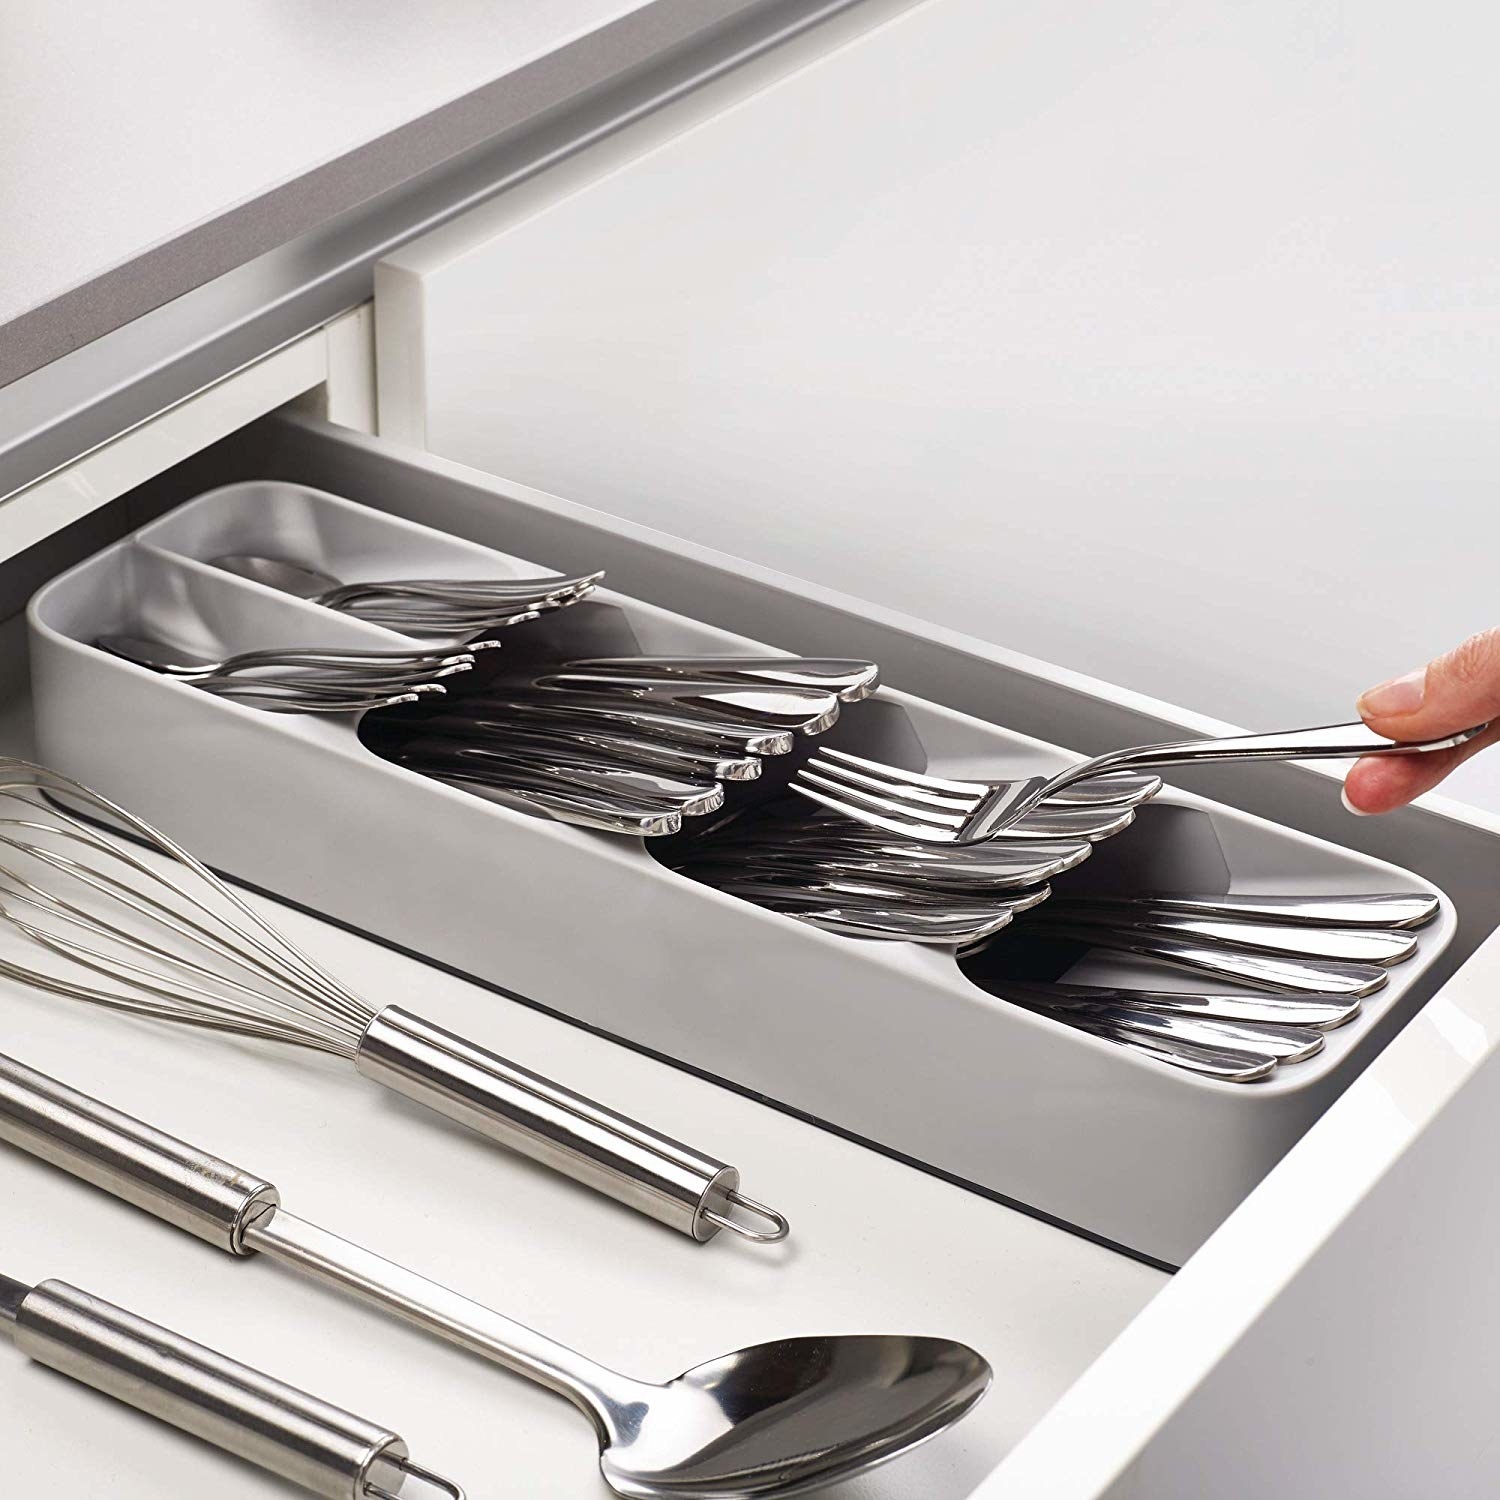 open kitchen drawer with narrow gray utensil organizer to take up less room in the kitchen drawer. Lots of room left in the drawer for other things